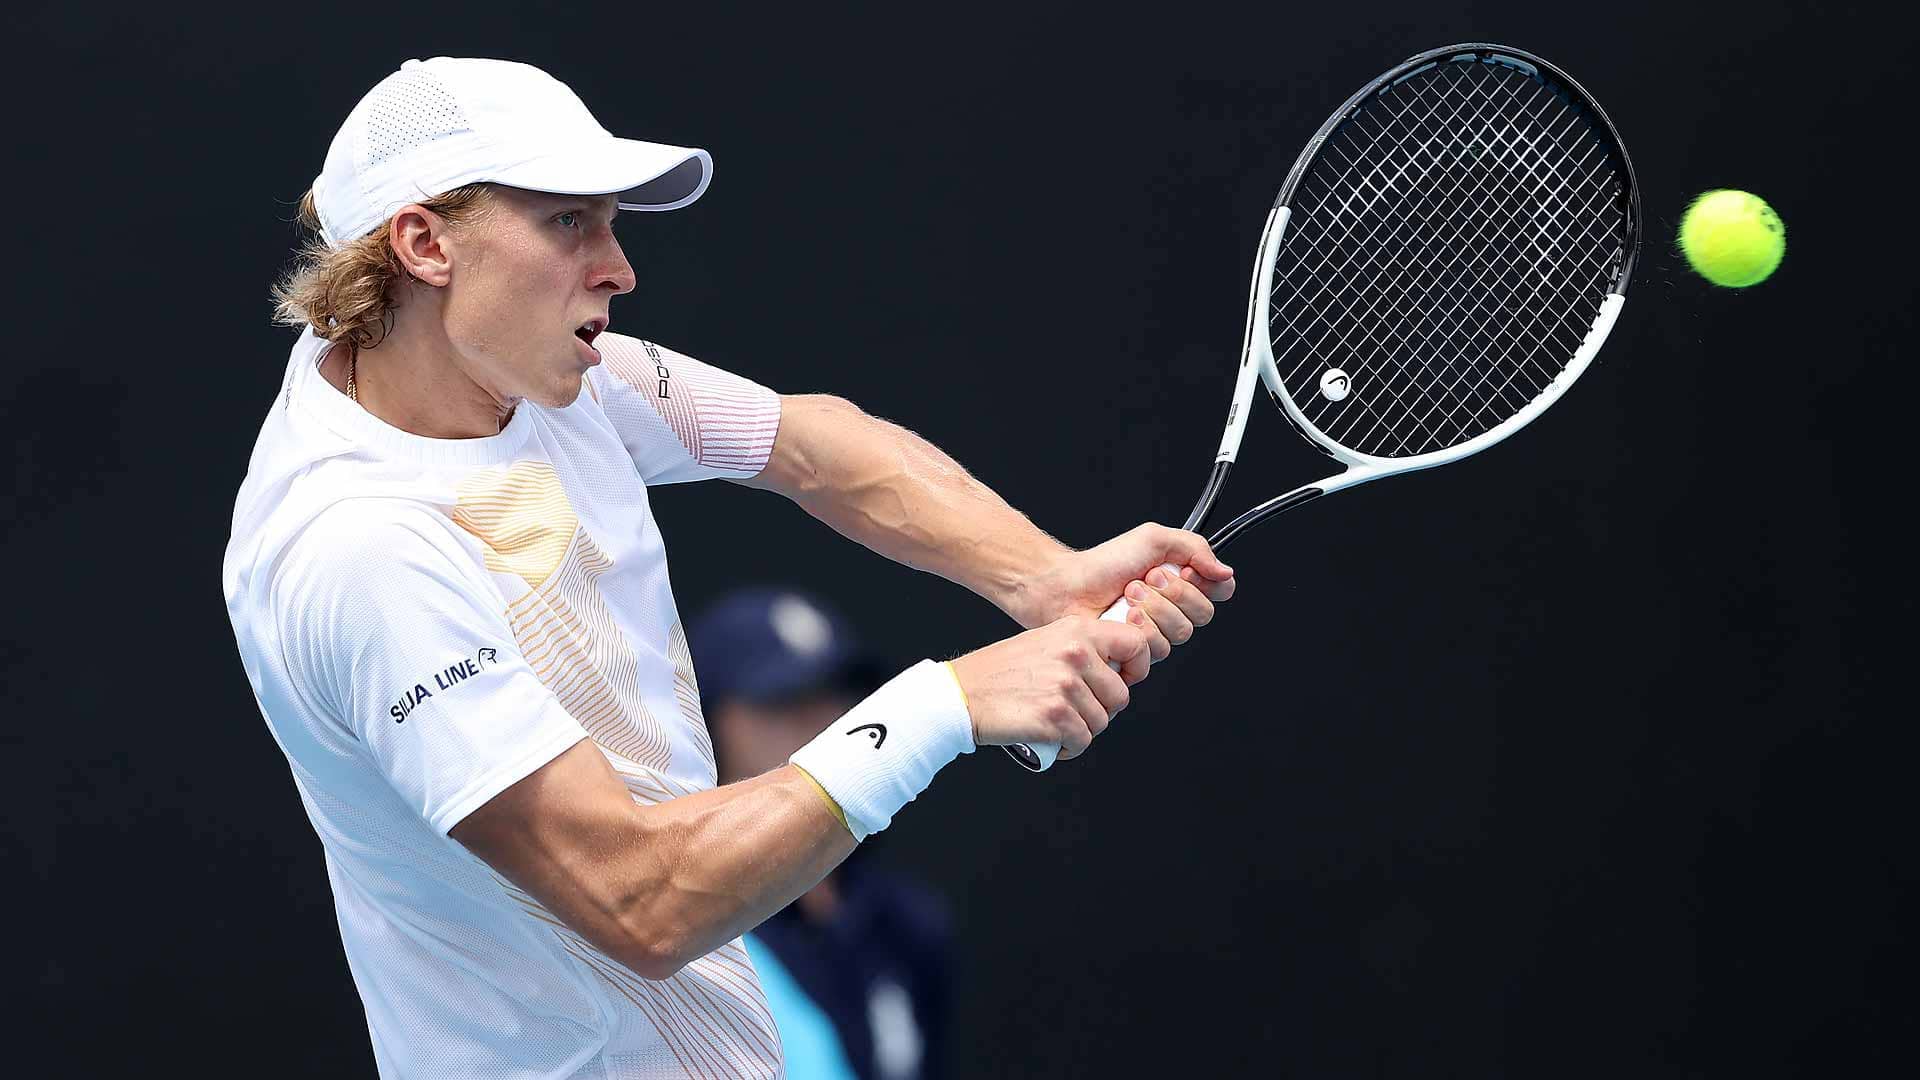 Emil Ruusuvuori reaches the second round of the Australian Open for the third time in four years.